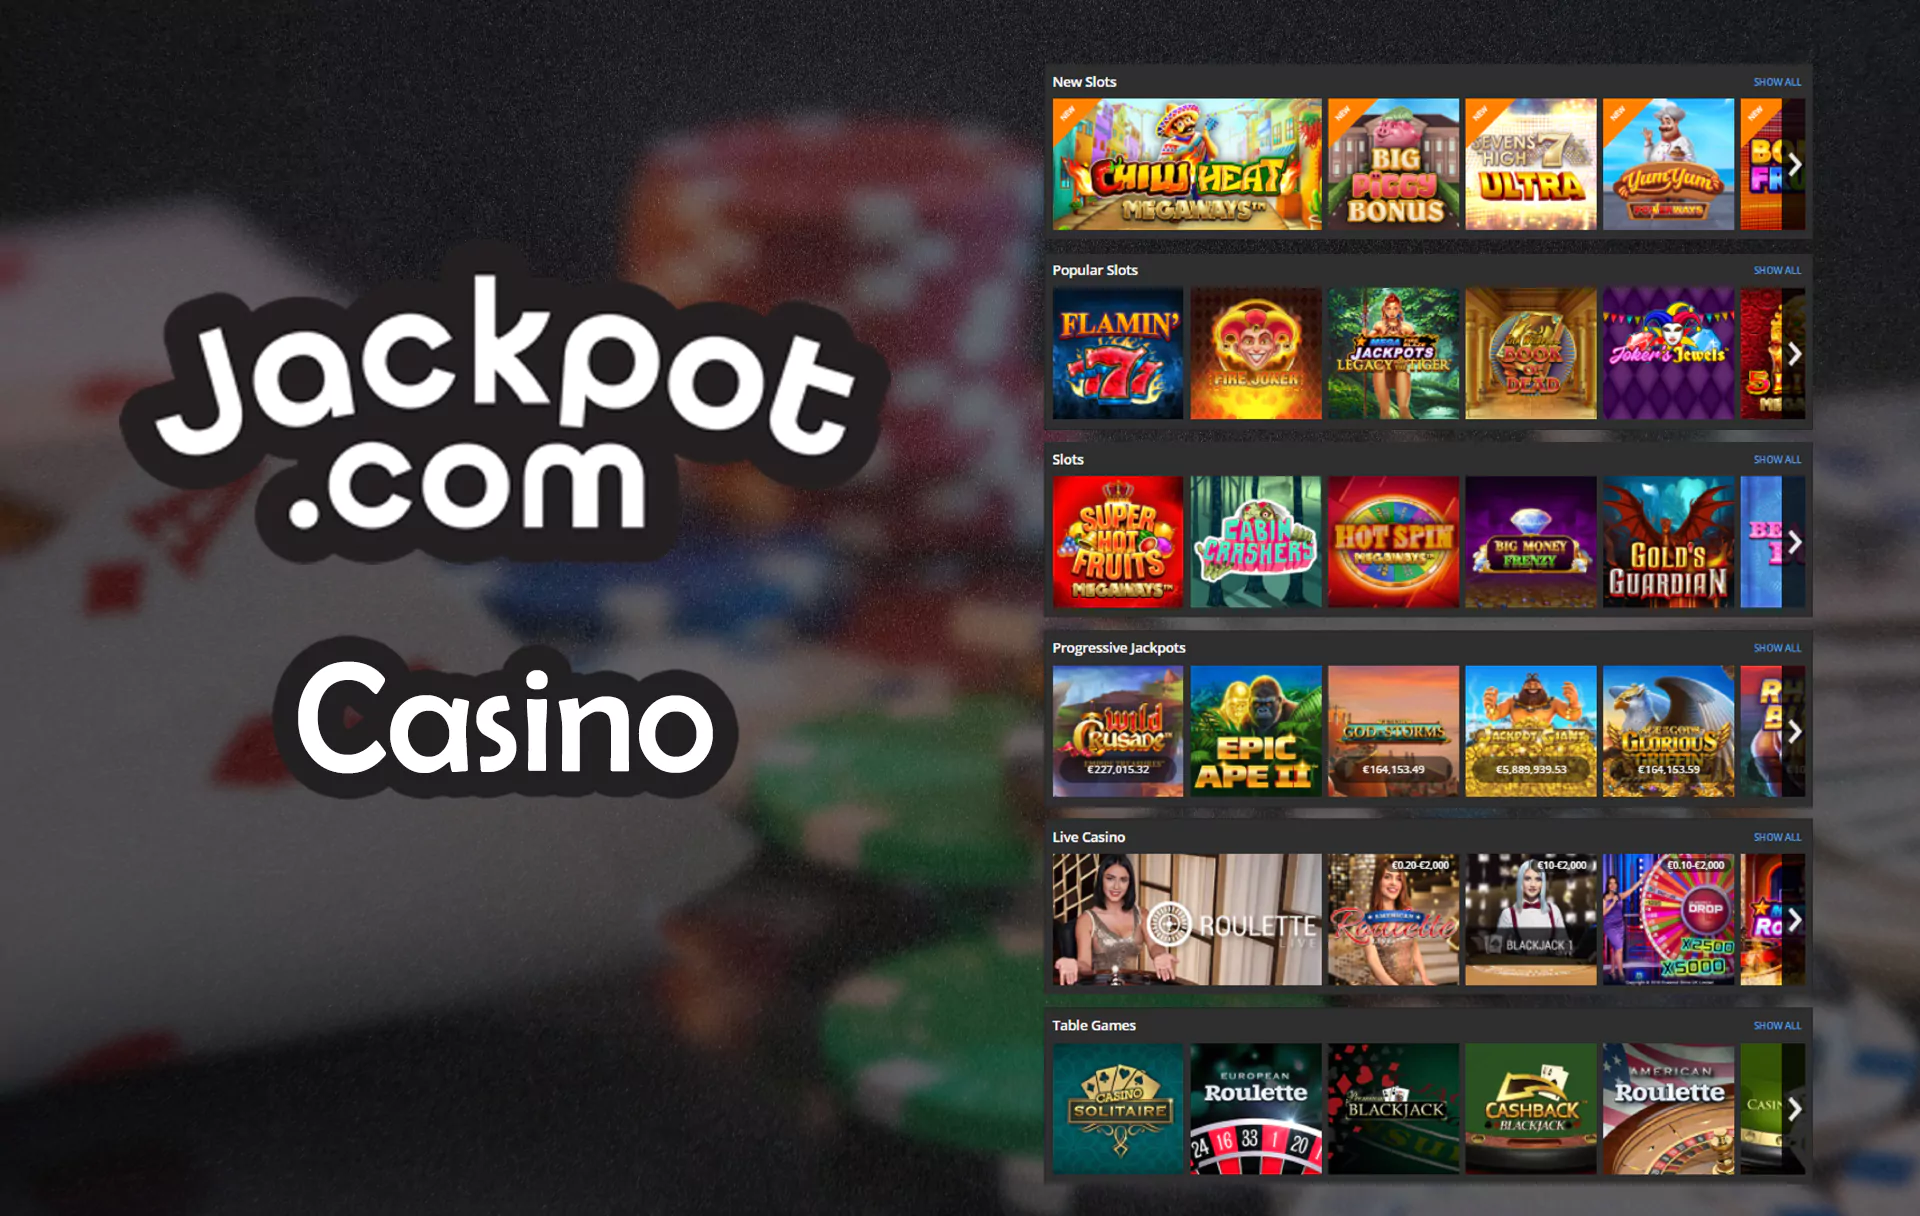 If you are a fan of slots and table games, try your fortune in the casino section.